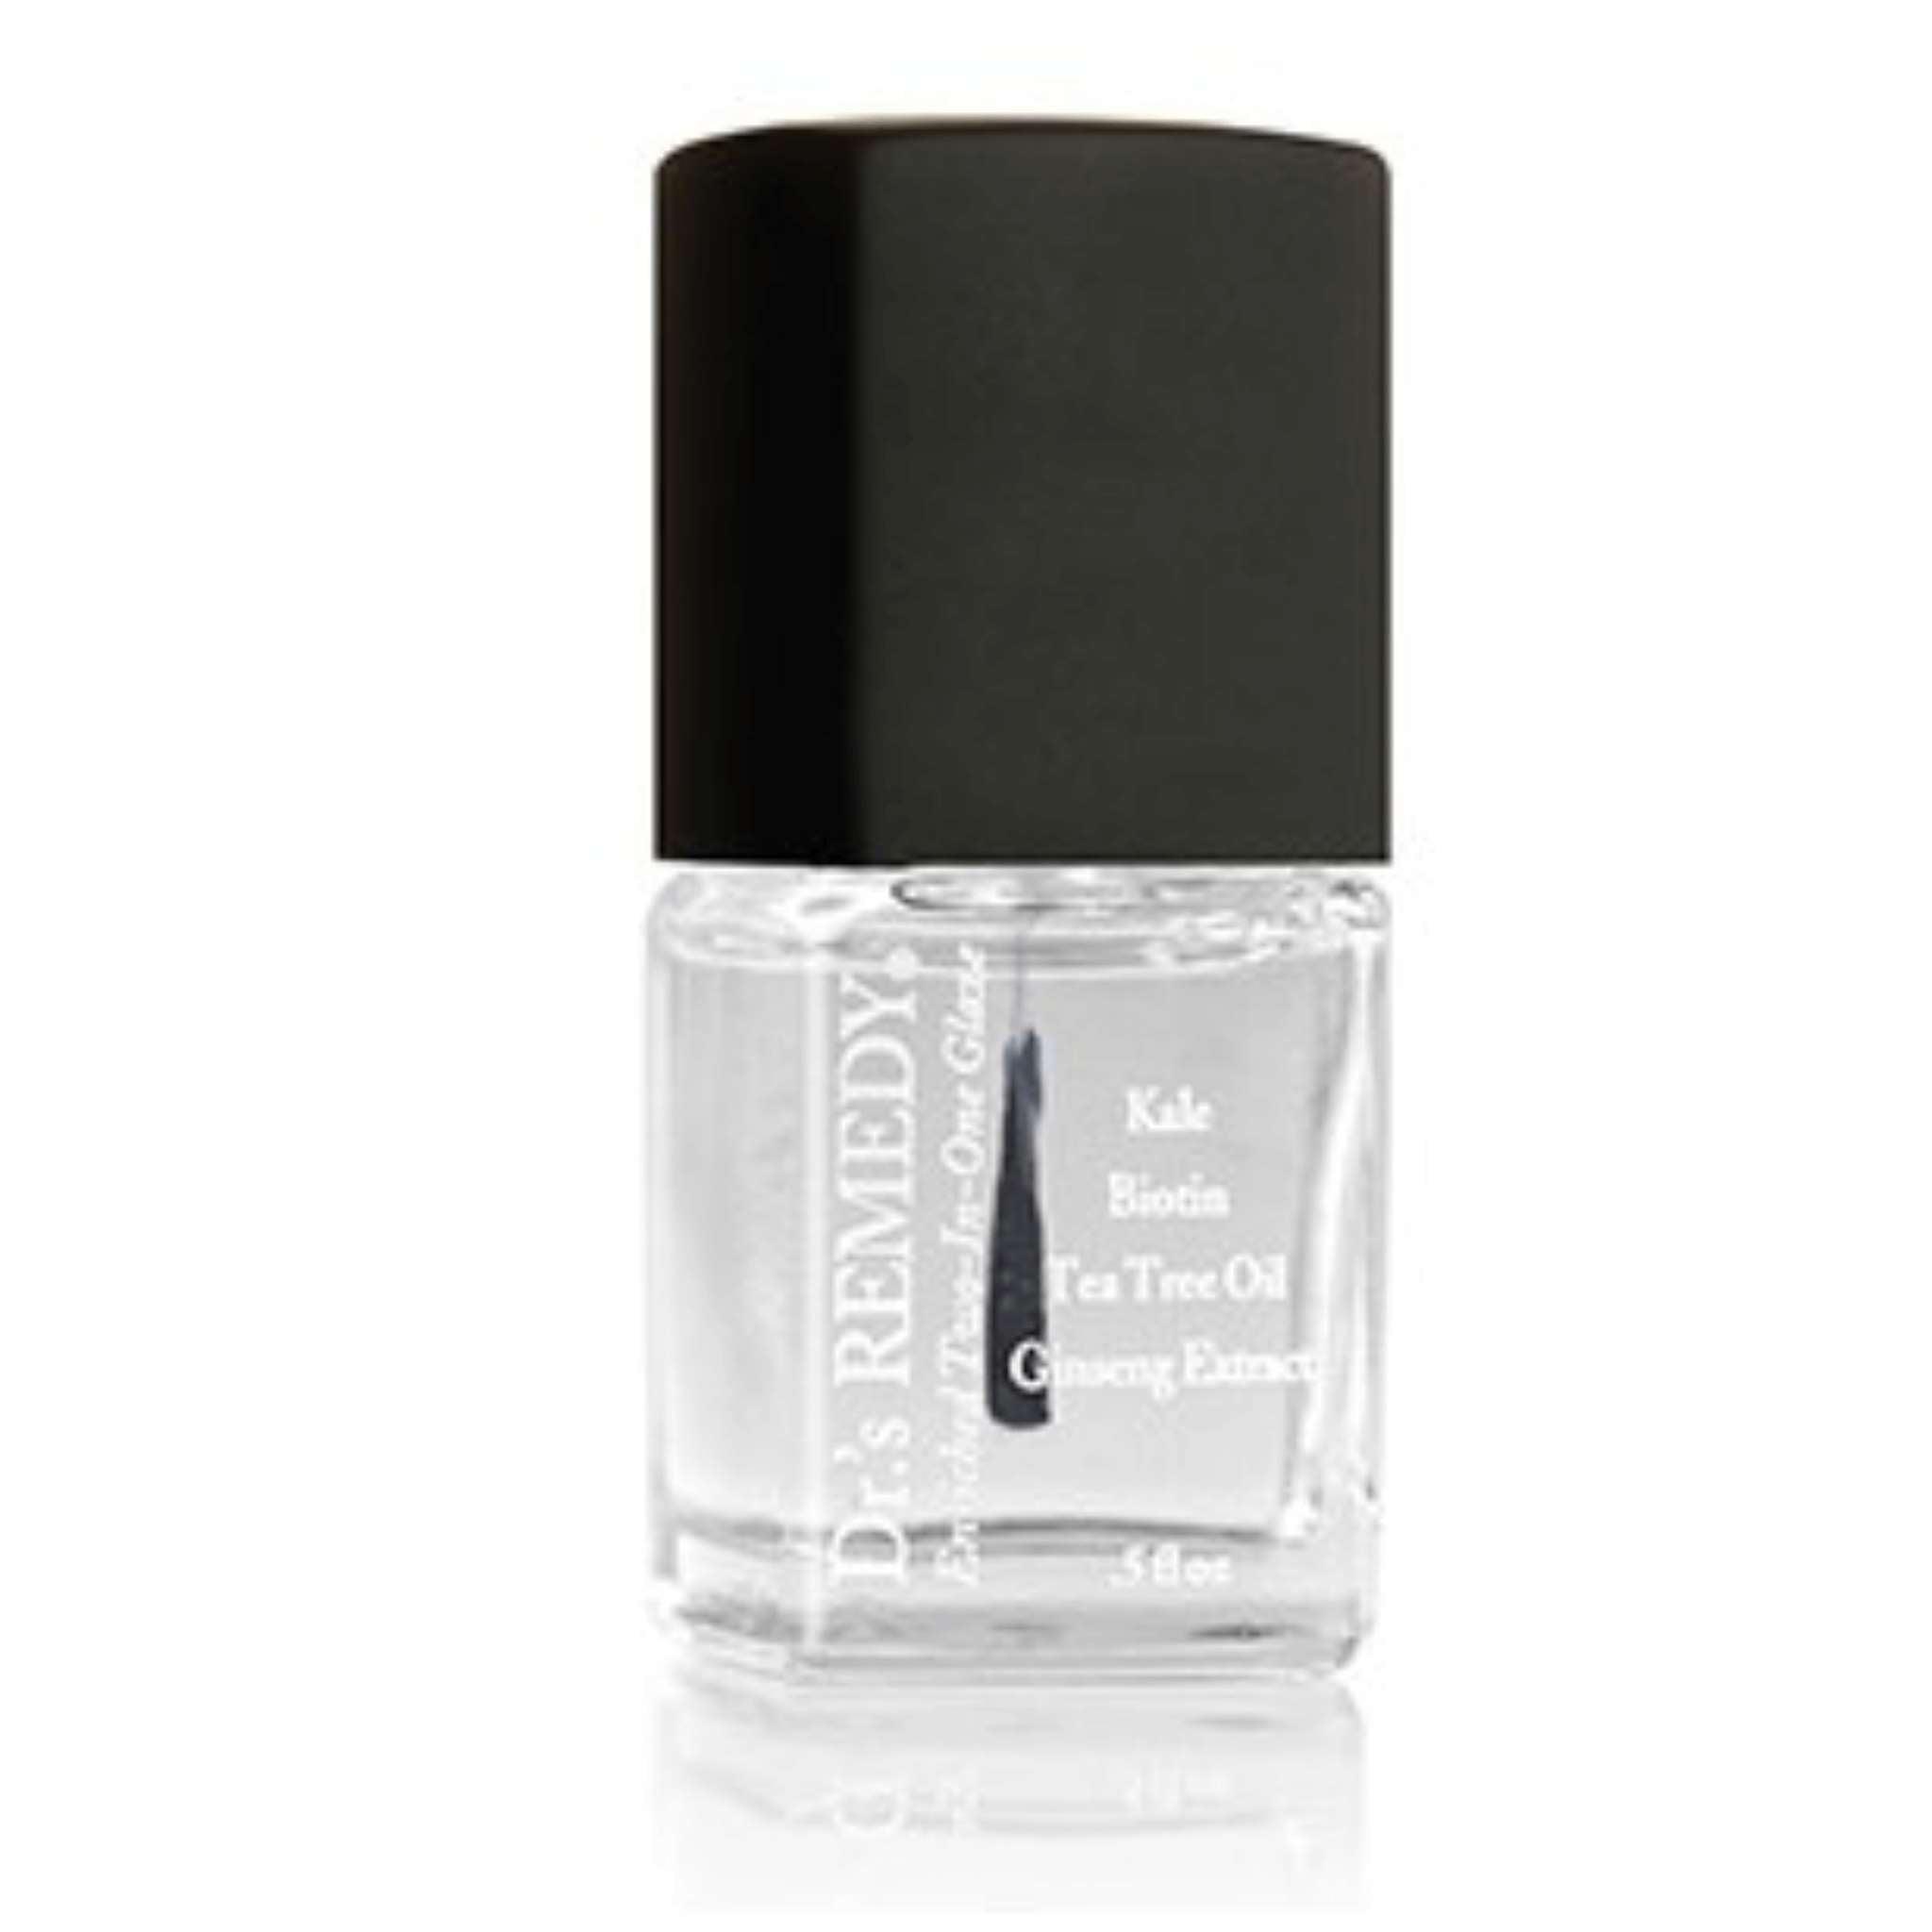 Dr.'s REMEDY / TOTAL Two-In-One Base/Top Coat 15ml